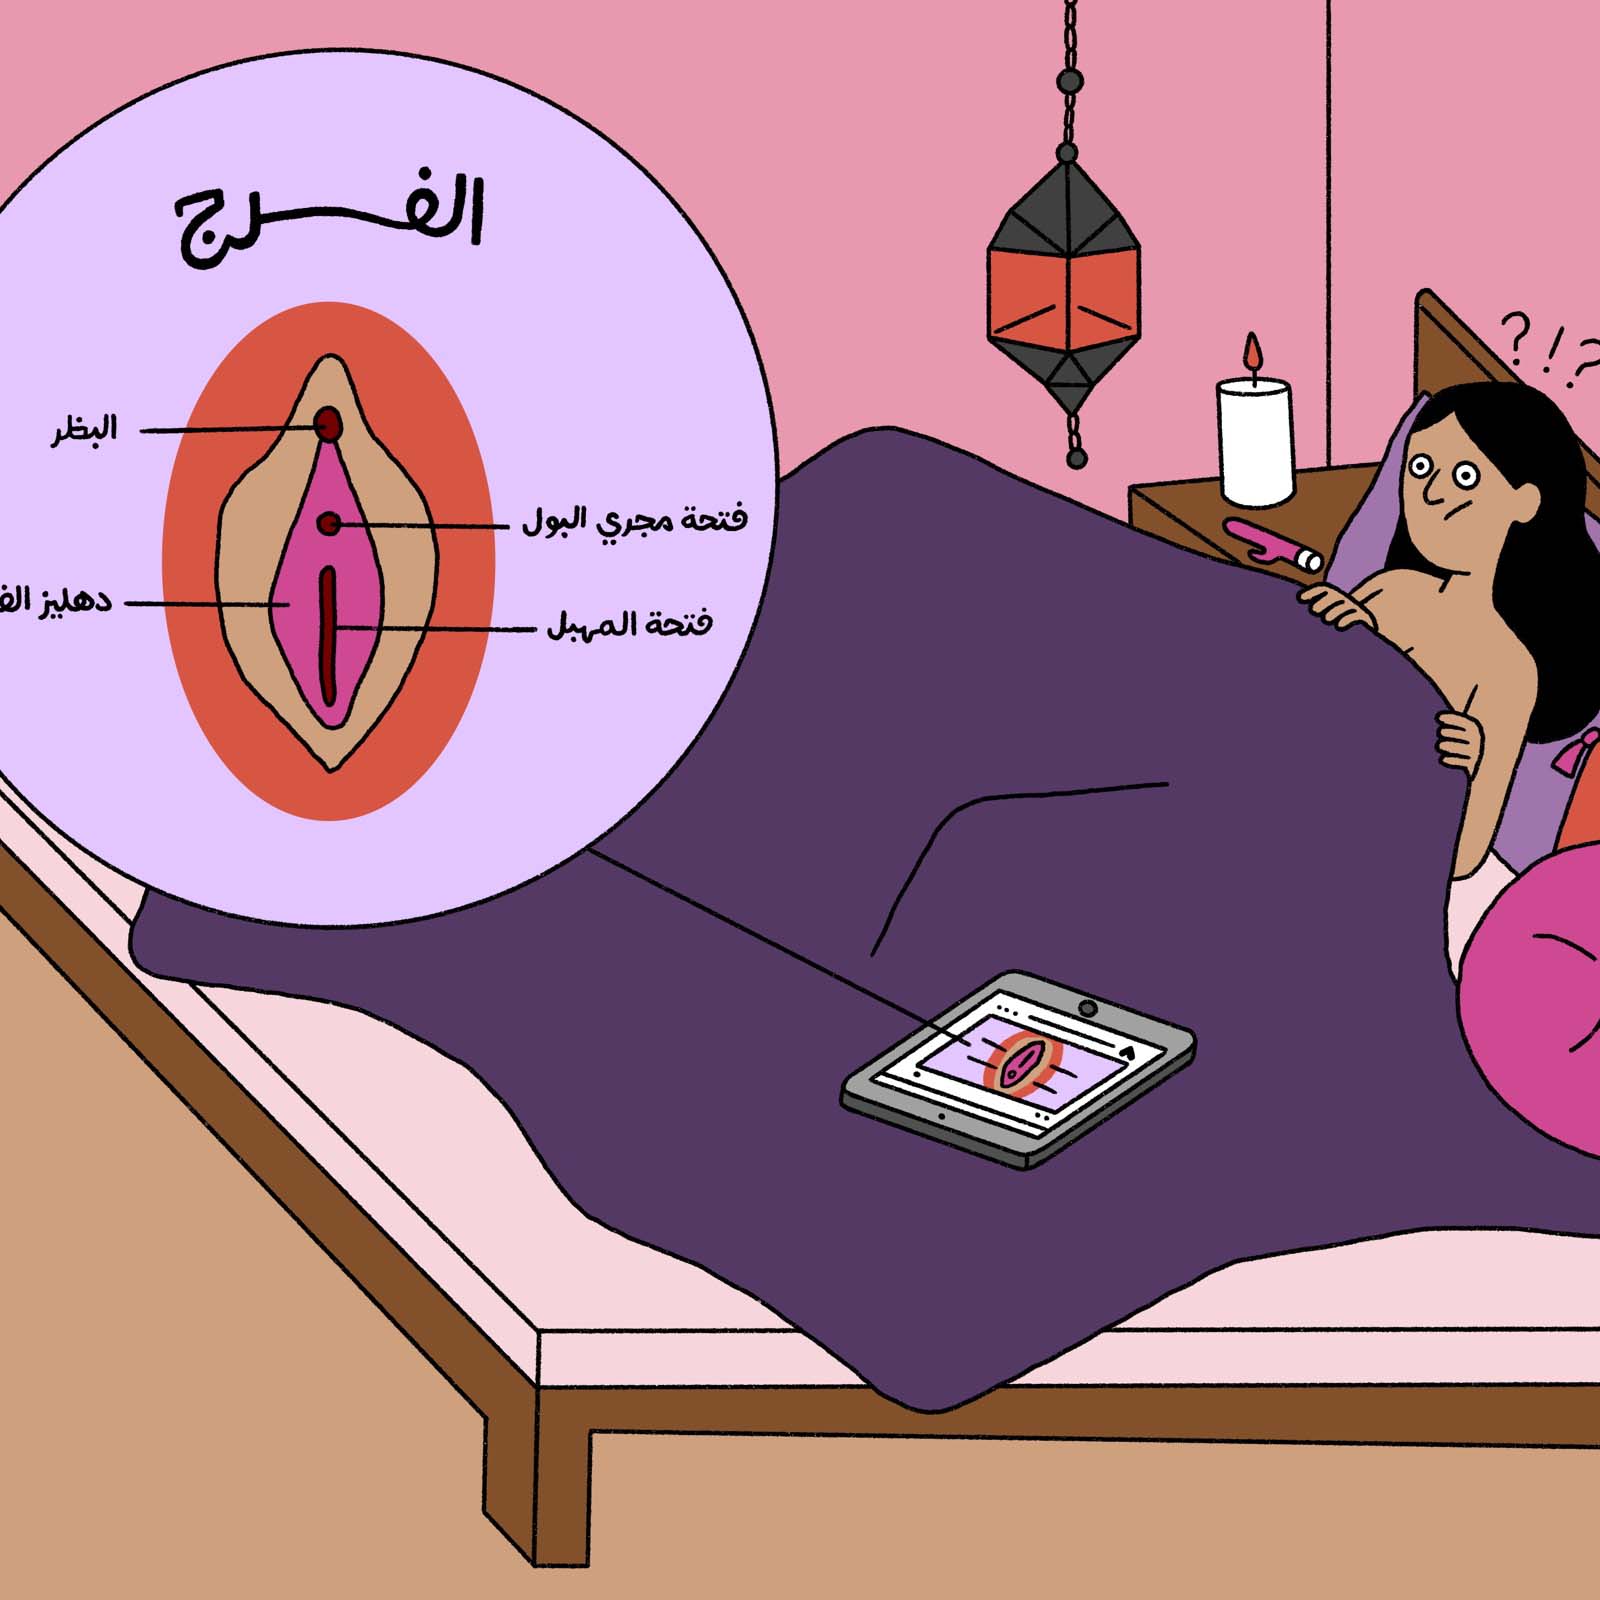 Building the Arab world's first sex education startup